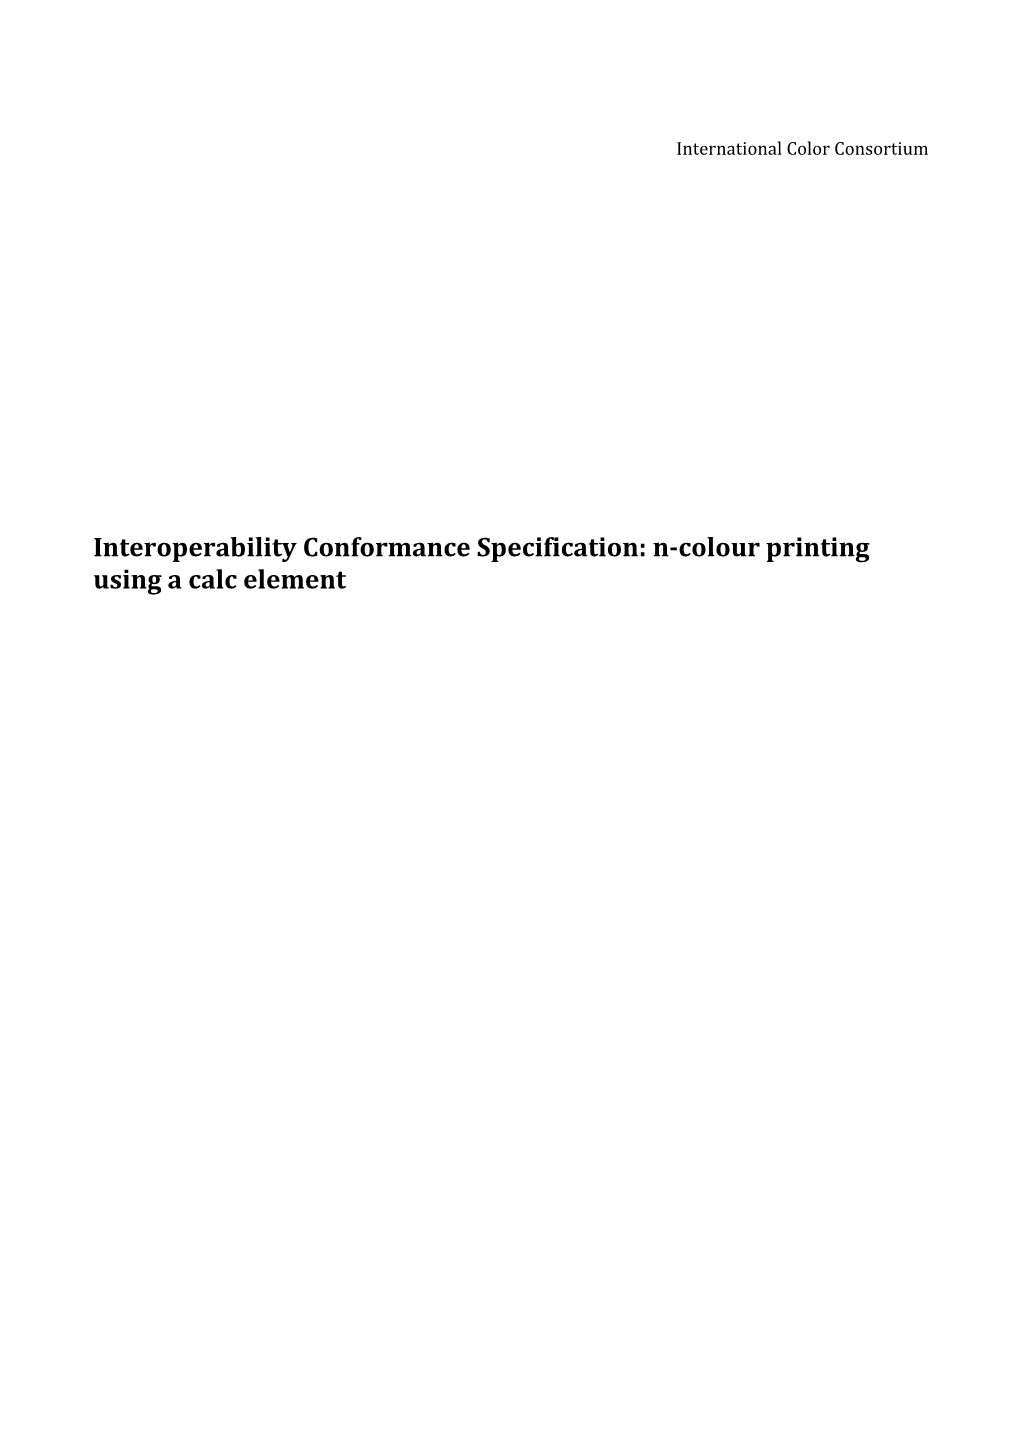 ICC Interoperability Conformance Specification: N-Colour Printing Using a Calc Element